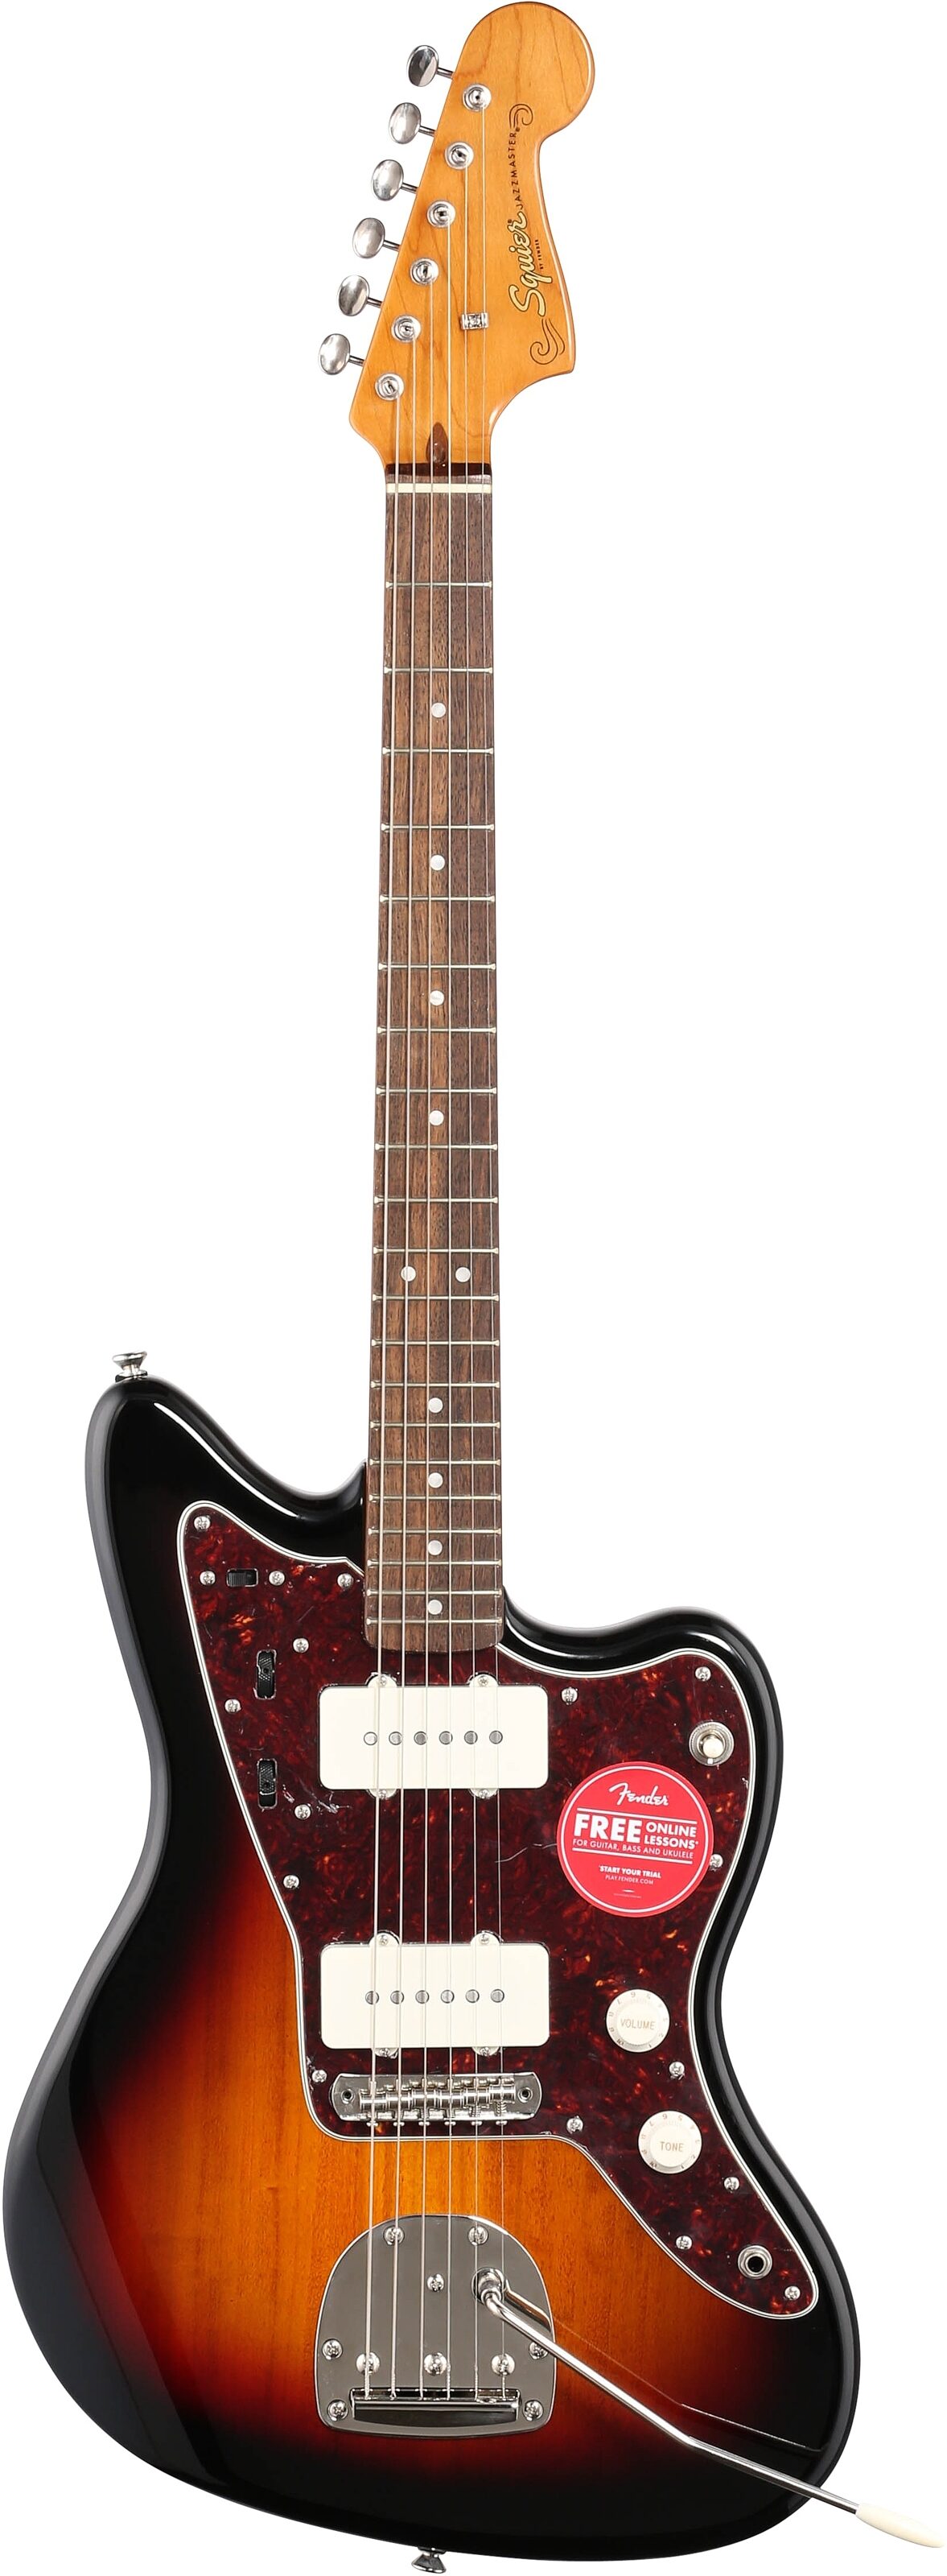 Squier Classic Vibe '60s Jazzmaster Electric Guitar, with Laurel Fingerboard